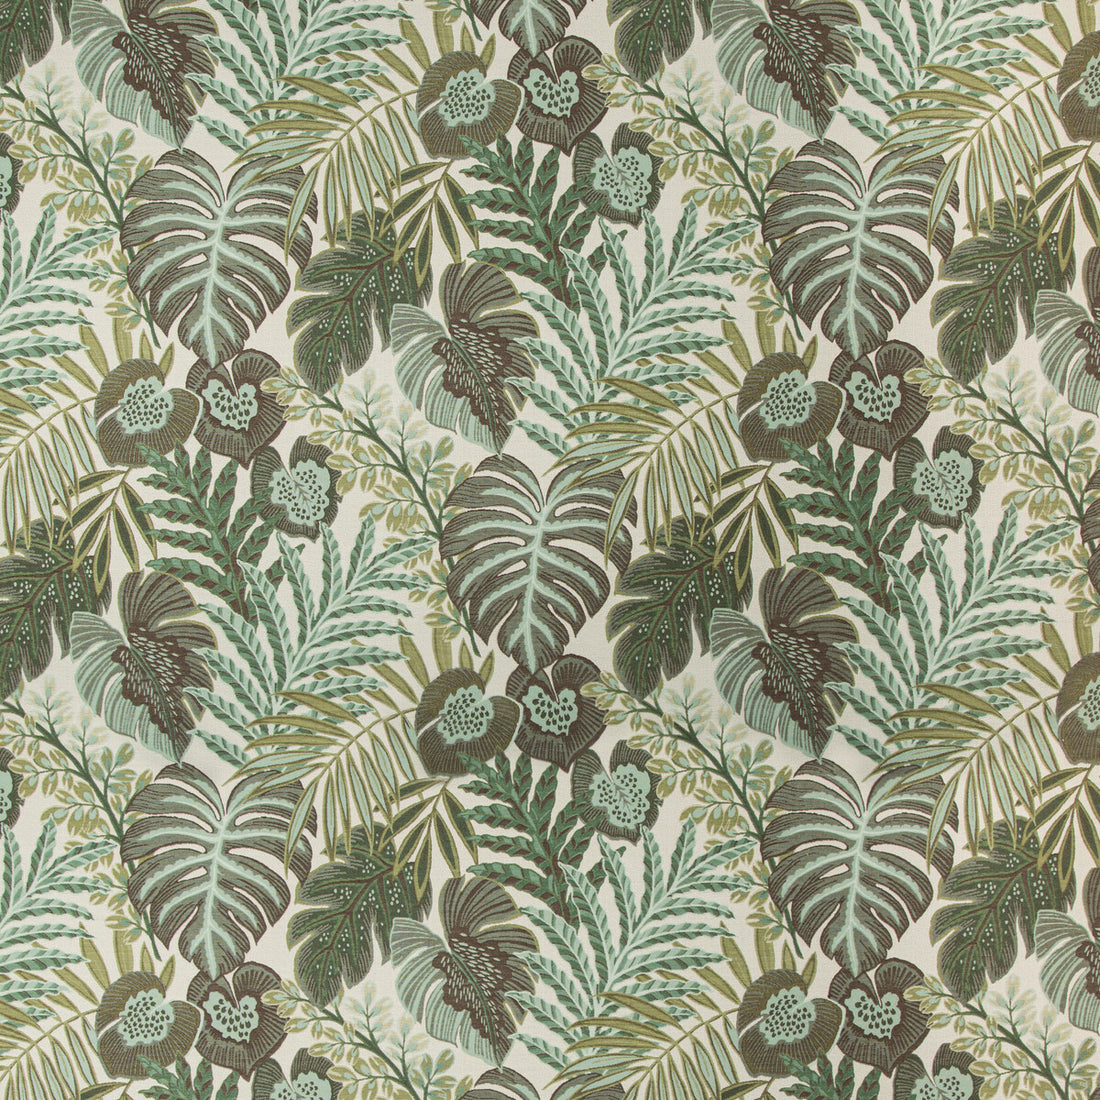 Sanur fabric in juniper color - pattern 35824.35.0 - by Kravet Design in the Indoor / Outdoor collection